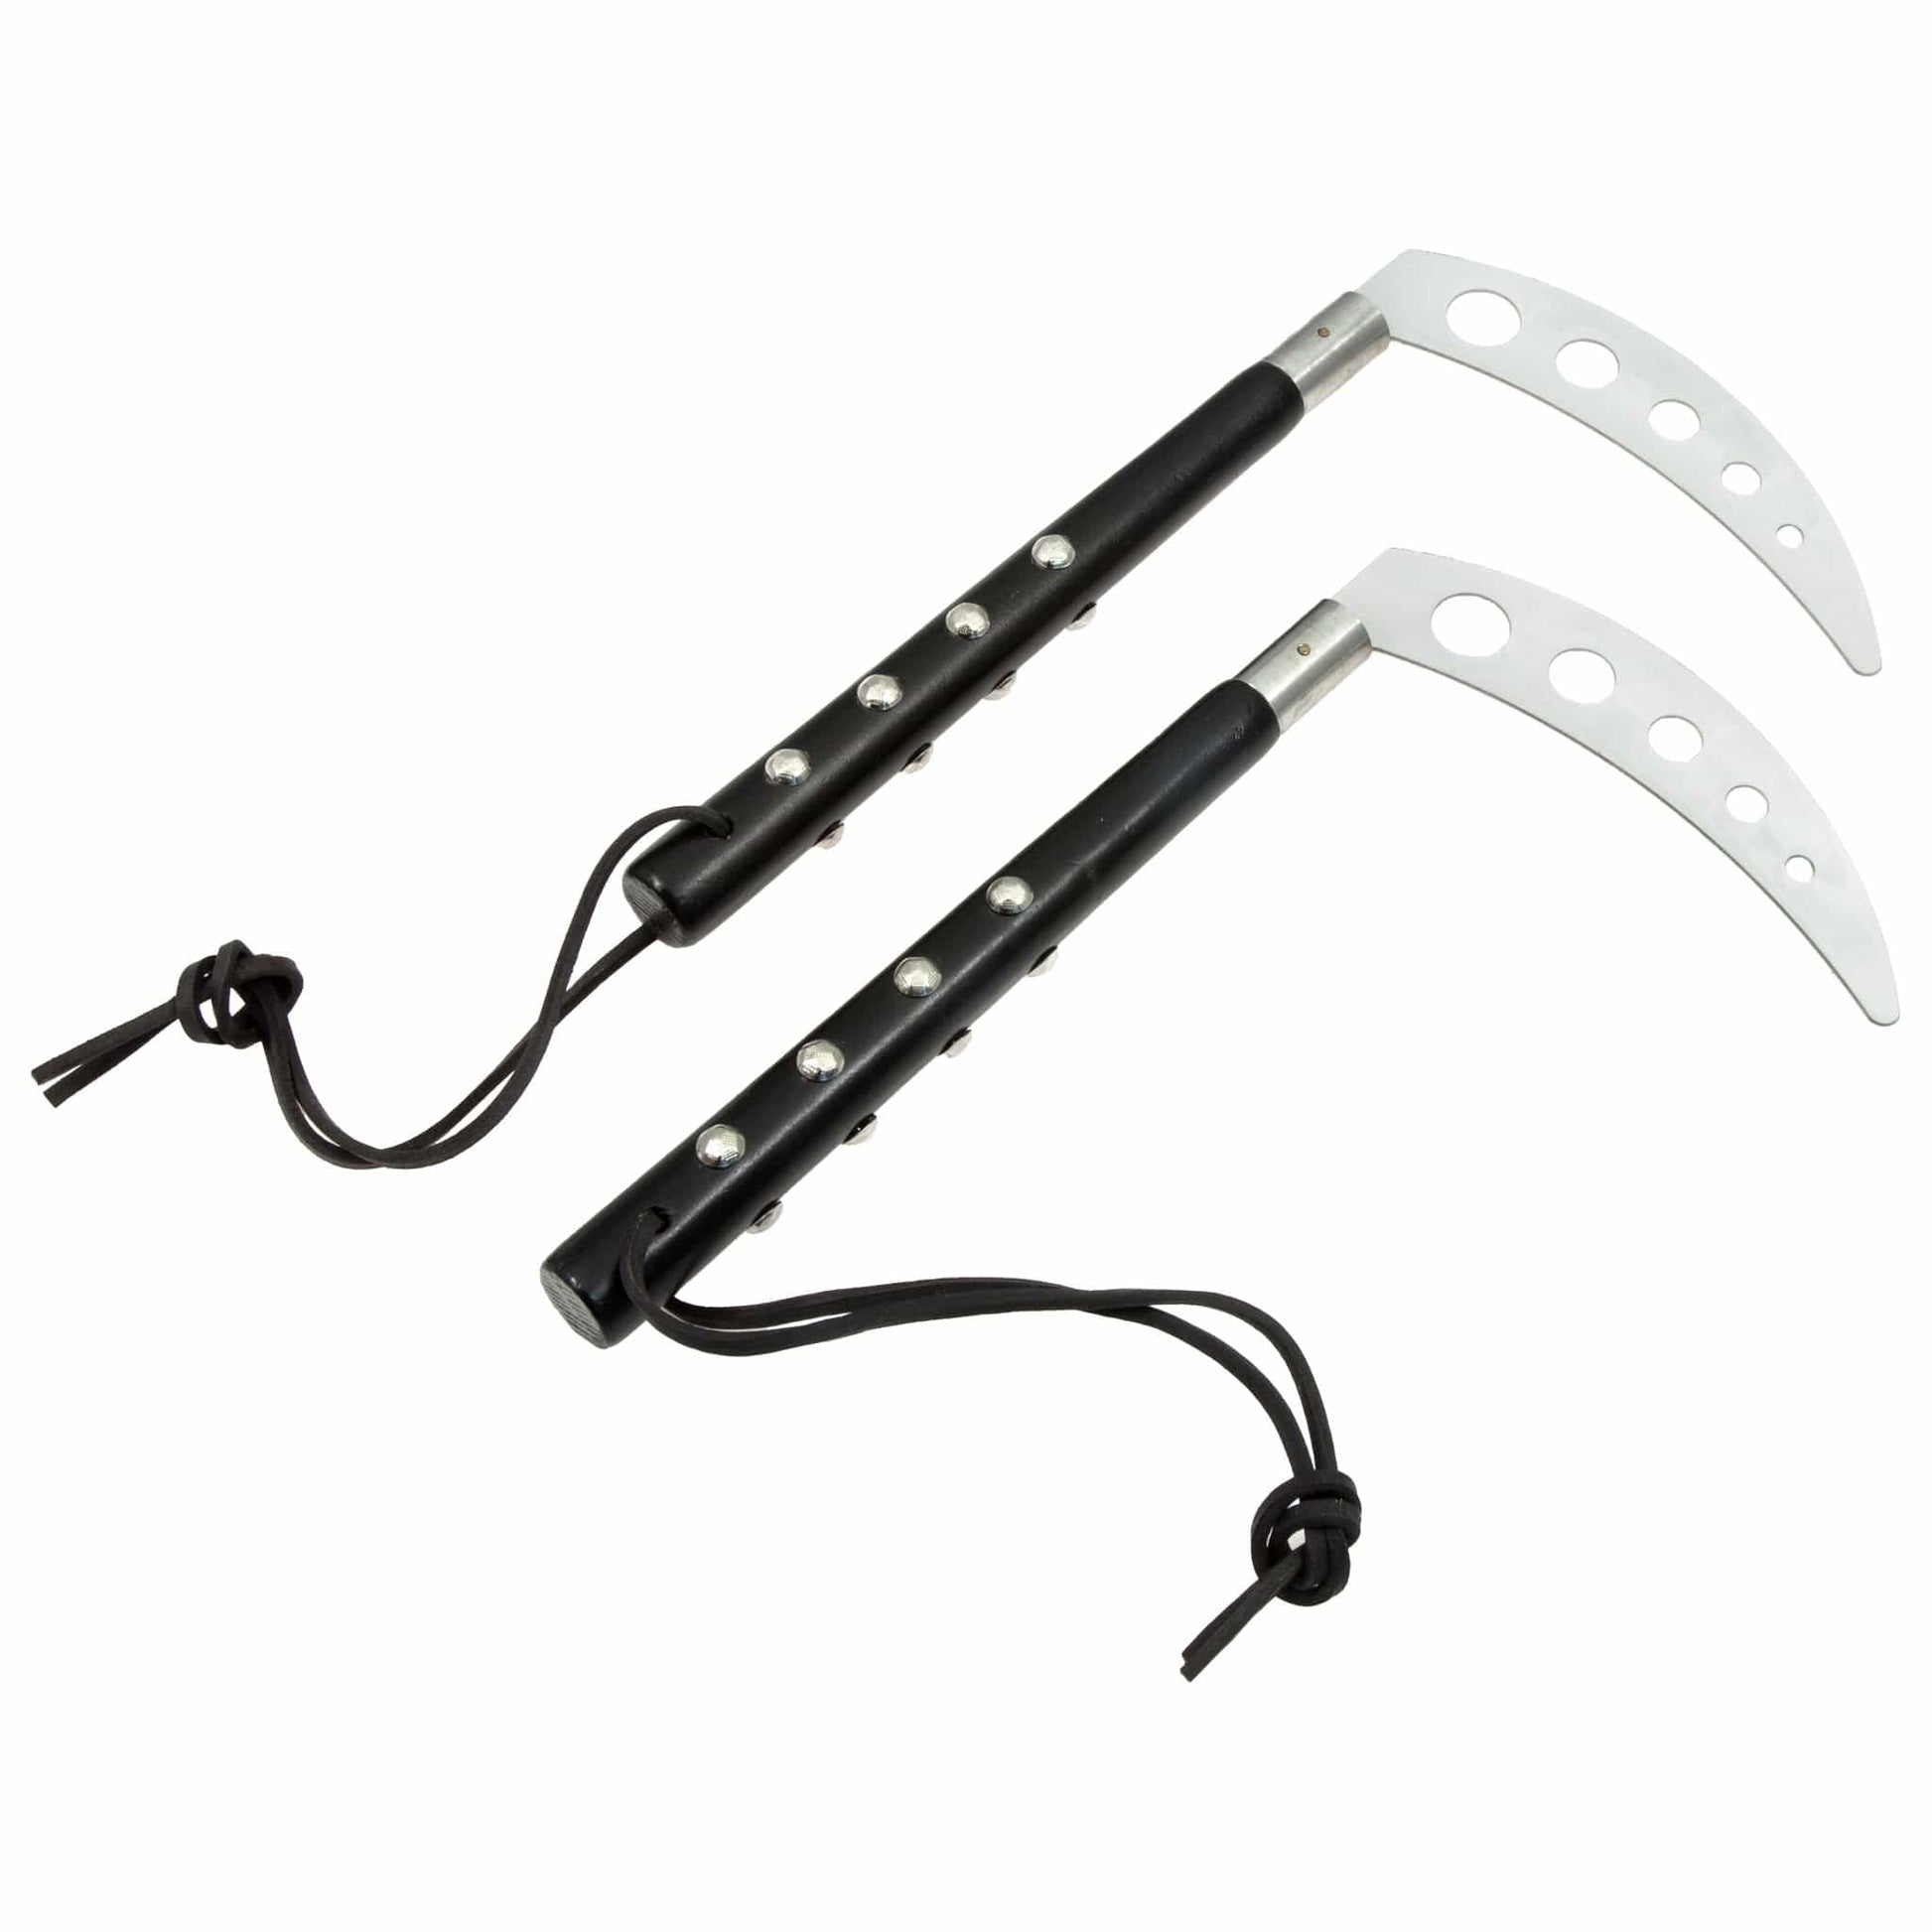 Eclipse Martial Art Supplies Black Studded Competition Kamas 10' inch